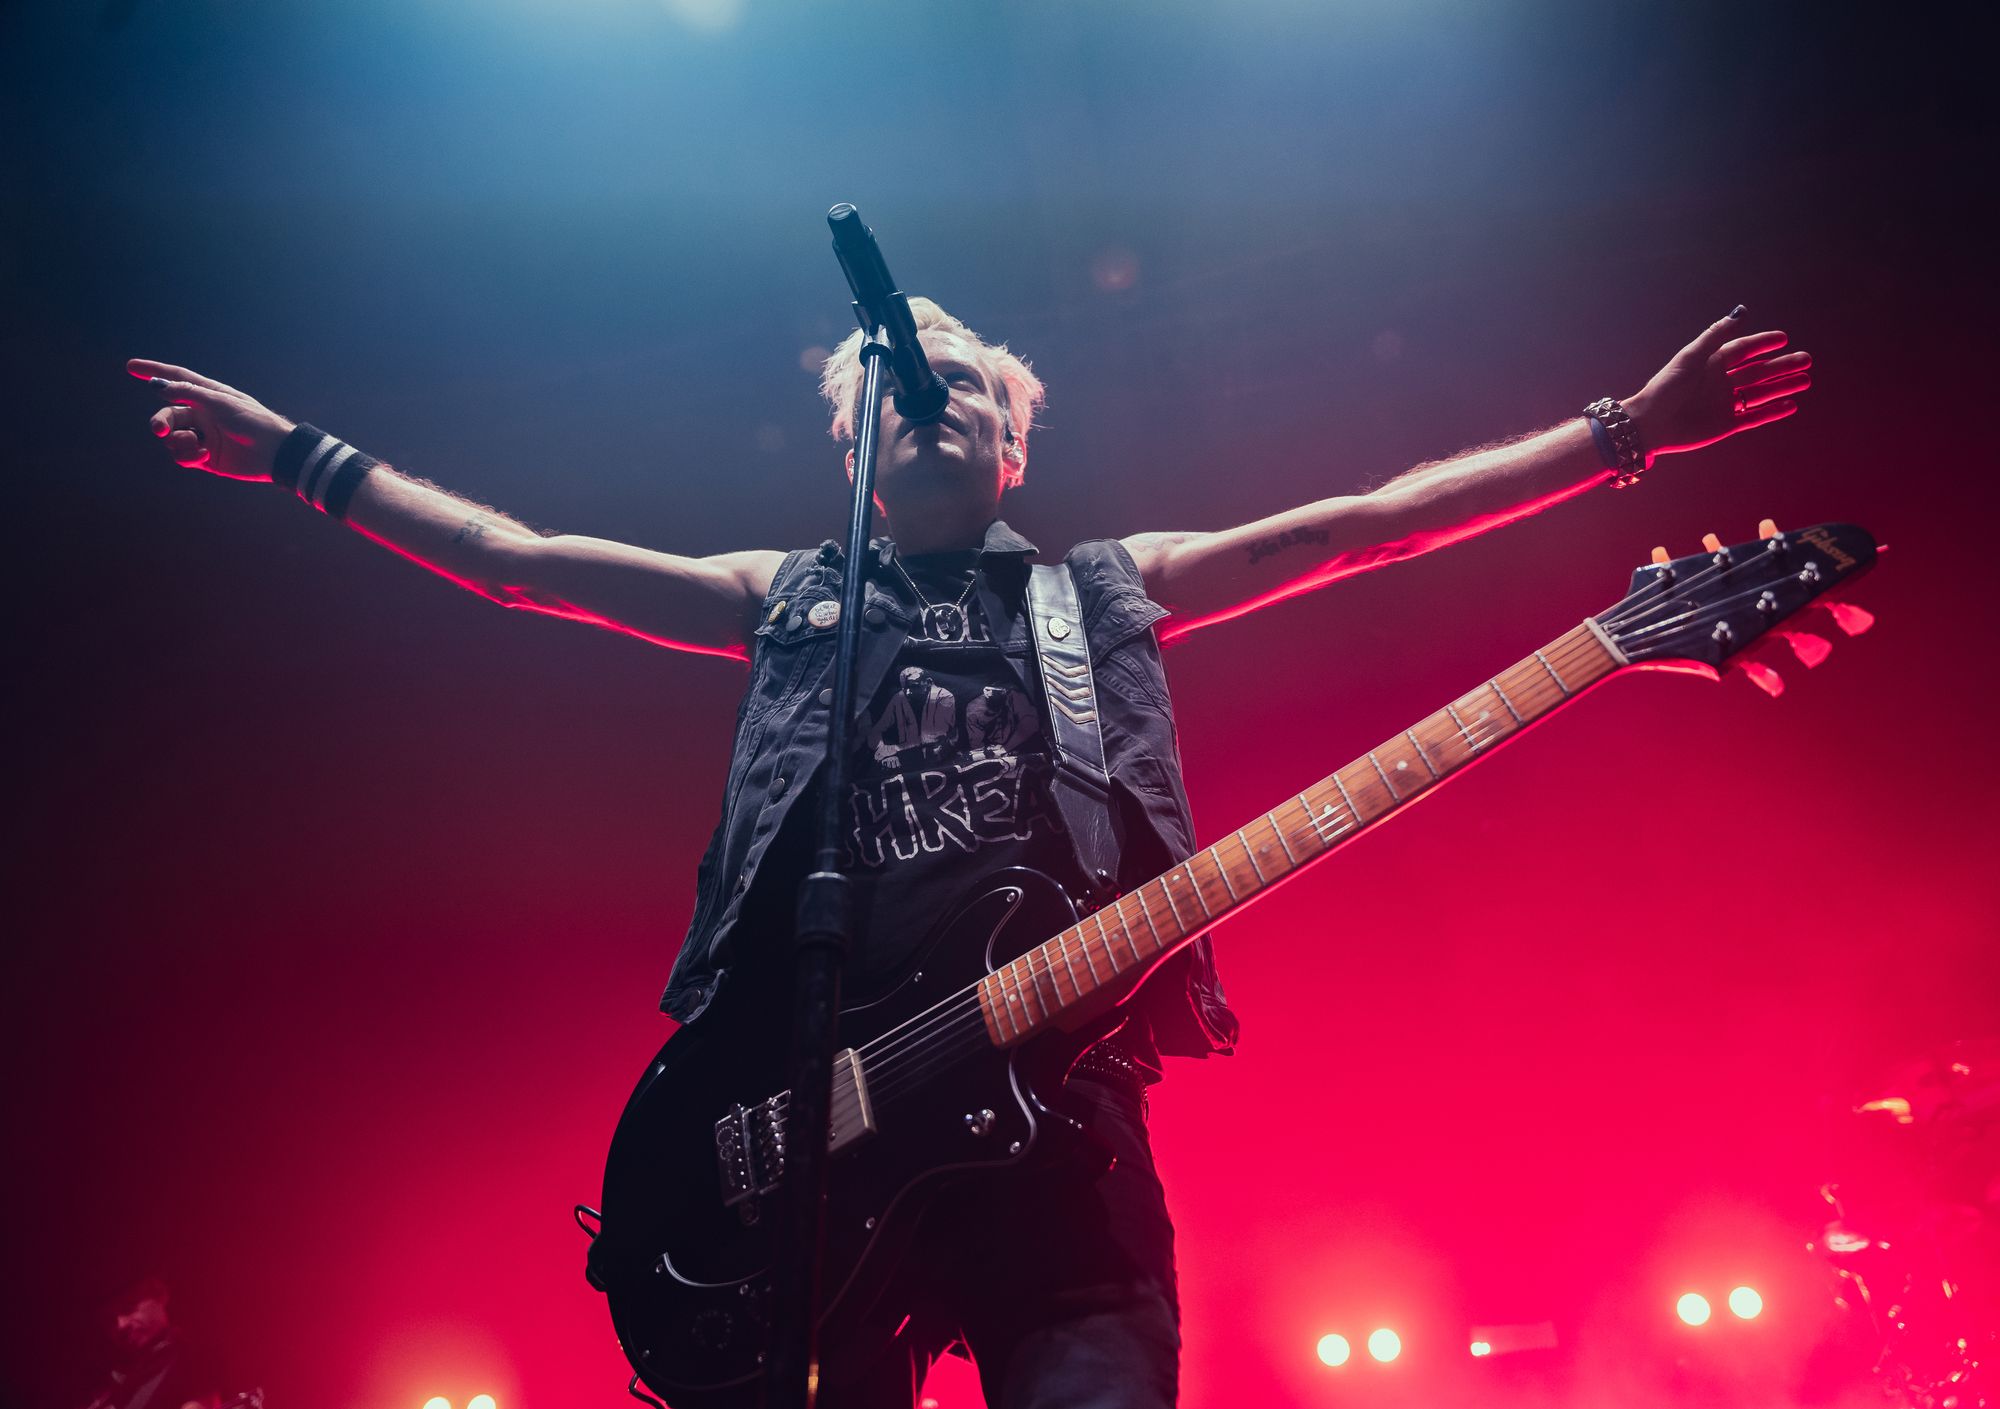 SUM 41 AND SIMPLE PLAN KICK OFF THEIR "BLAME CANADA" TOUR IN RALEIGH